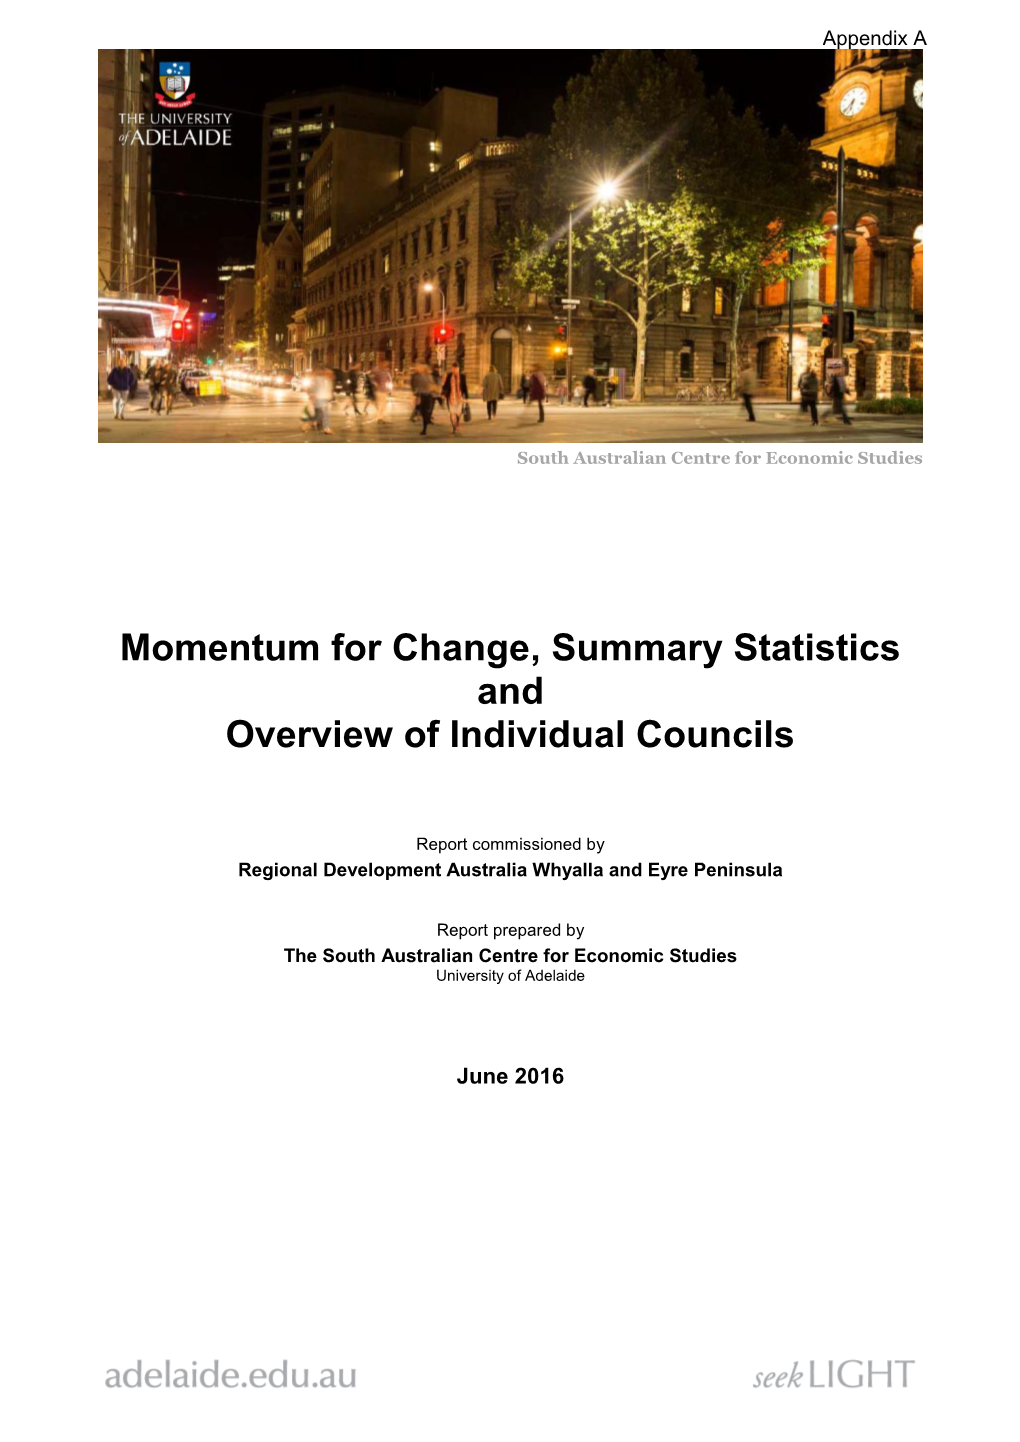 Momentum for Change, Summary Statistics and Overview of Individual Councils